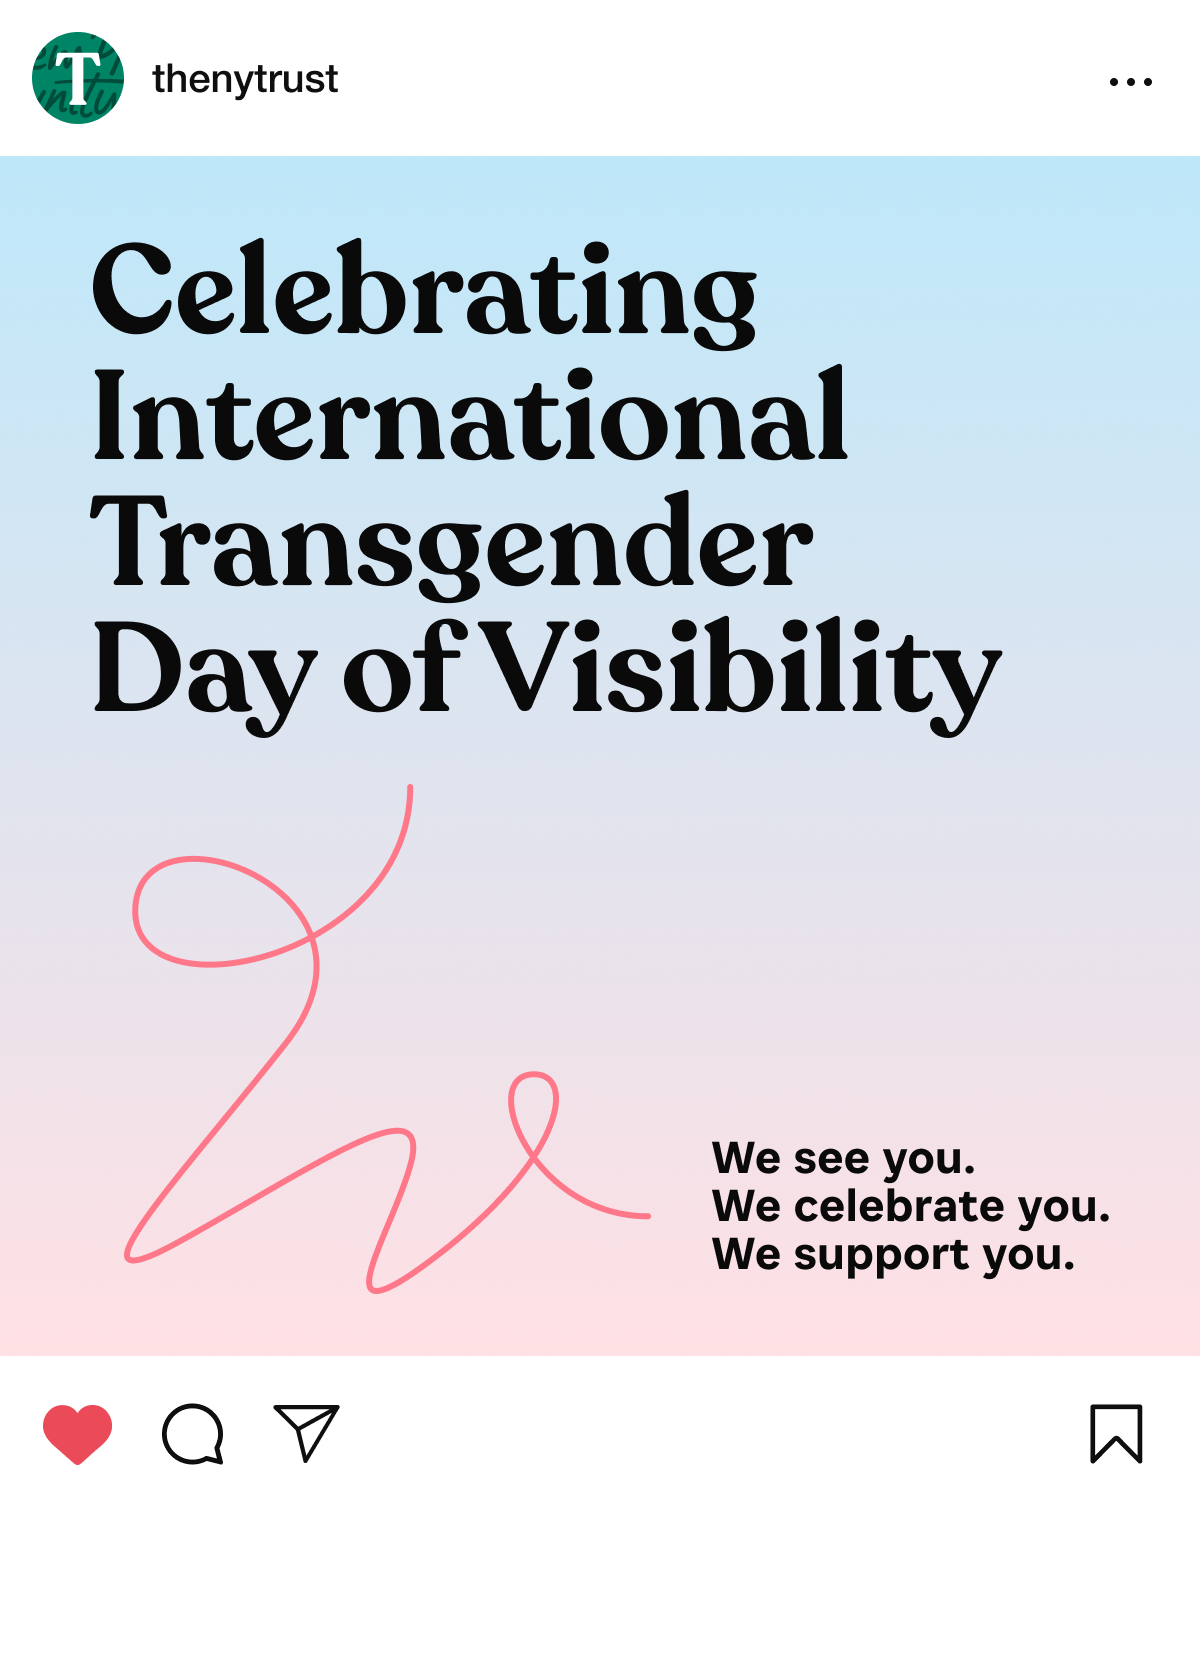 An Instagram post by @thenytrust features text reading "Celebrating International Transgender Day of Visibility" on a gradient background of blue to pink. Below, there's a heart drawing with the message, "We see you. We celebrate you. We support you.